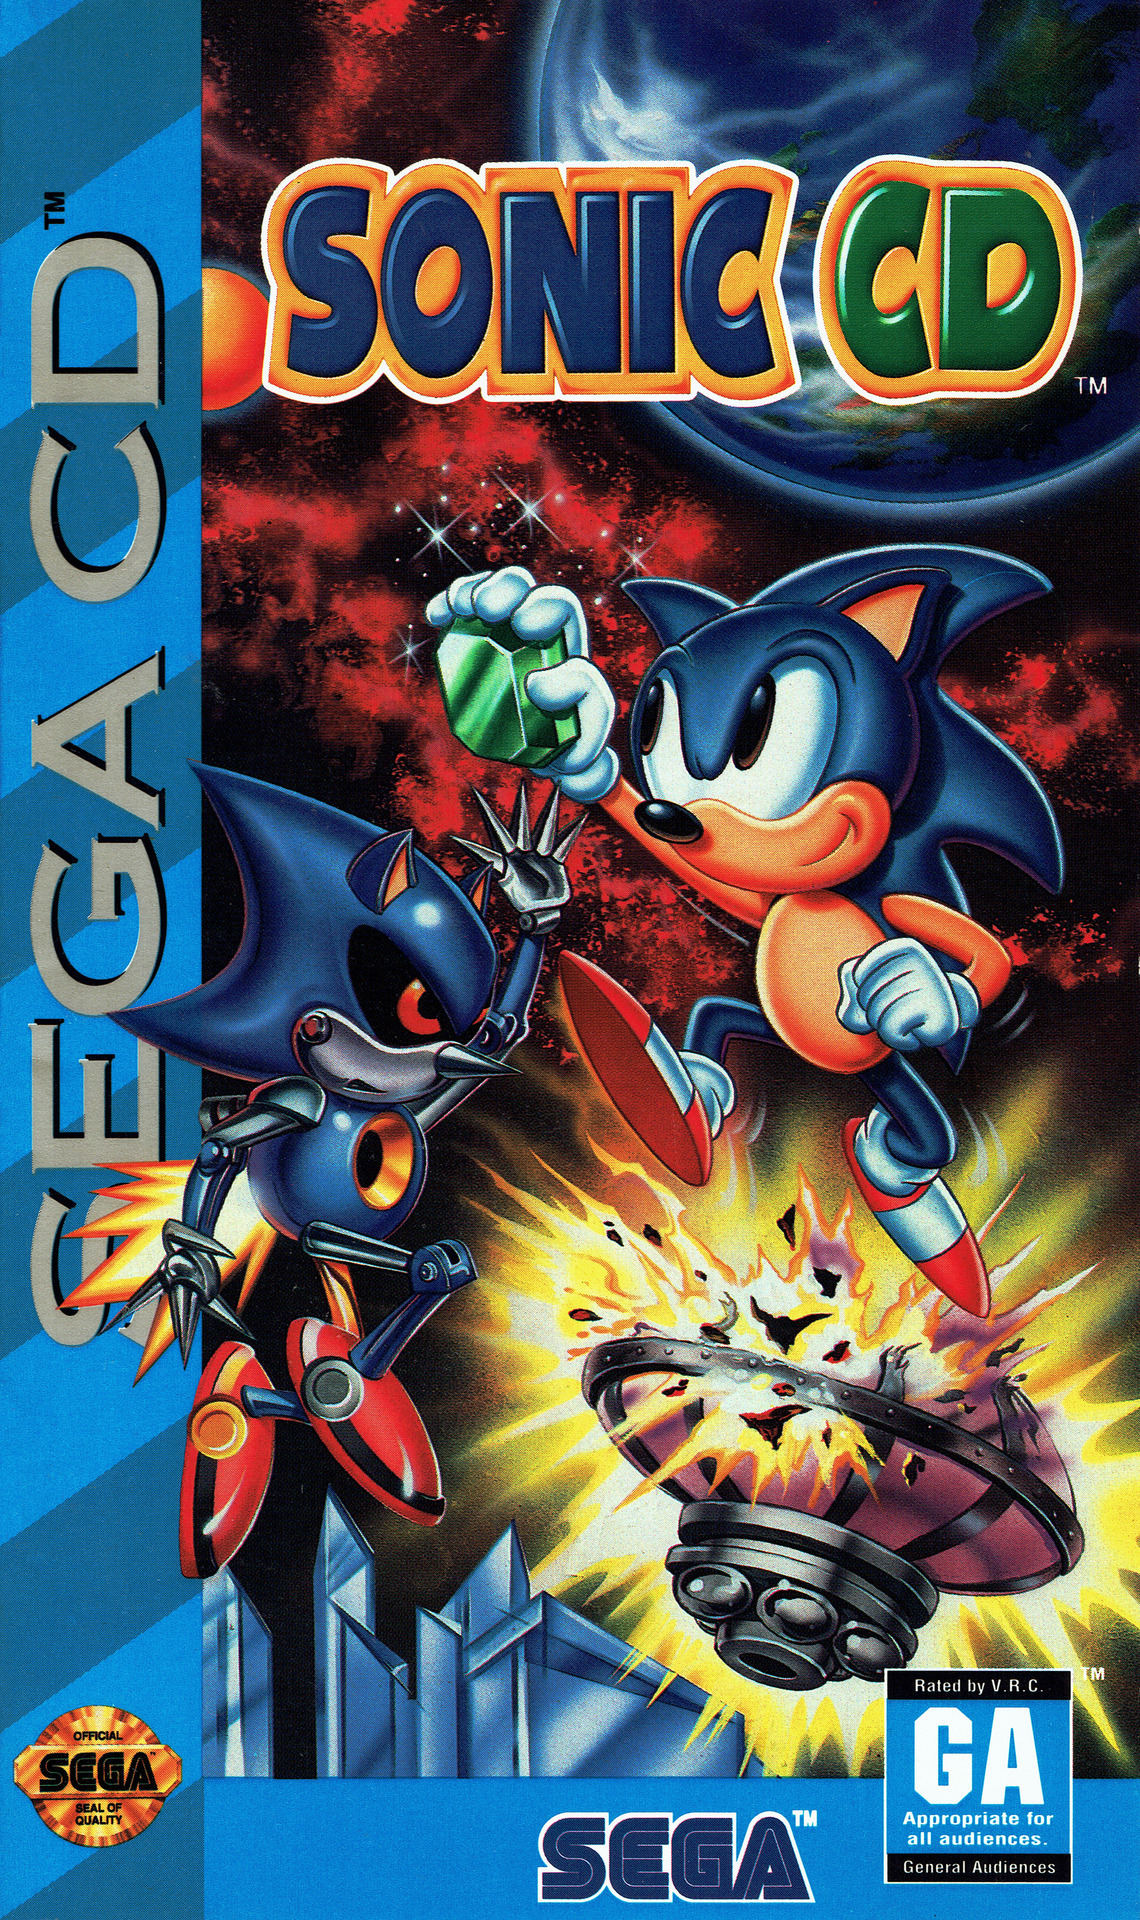 Sonic the Hedgehog CD (Video Game) - TV Tropes